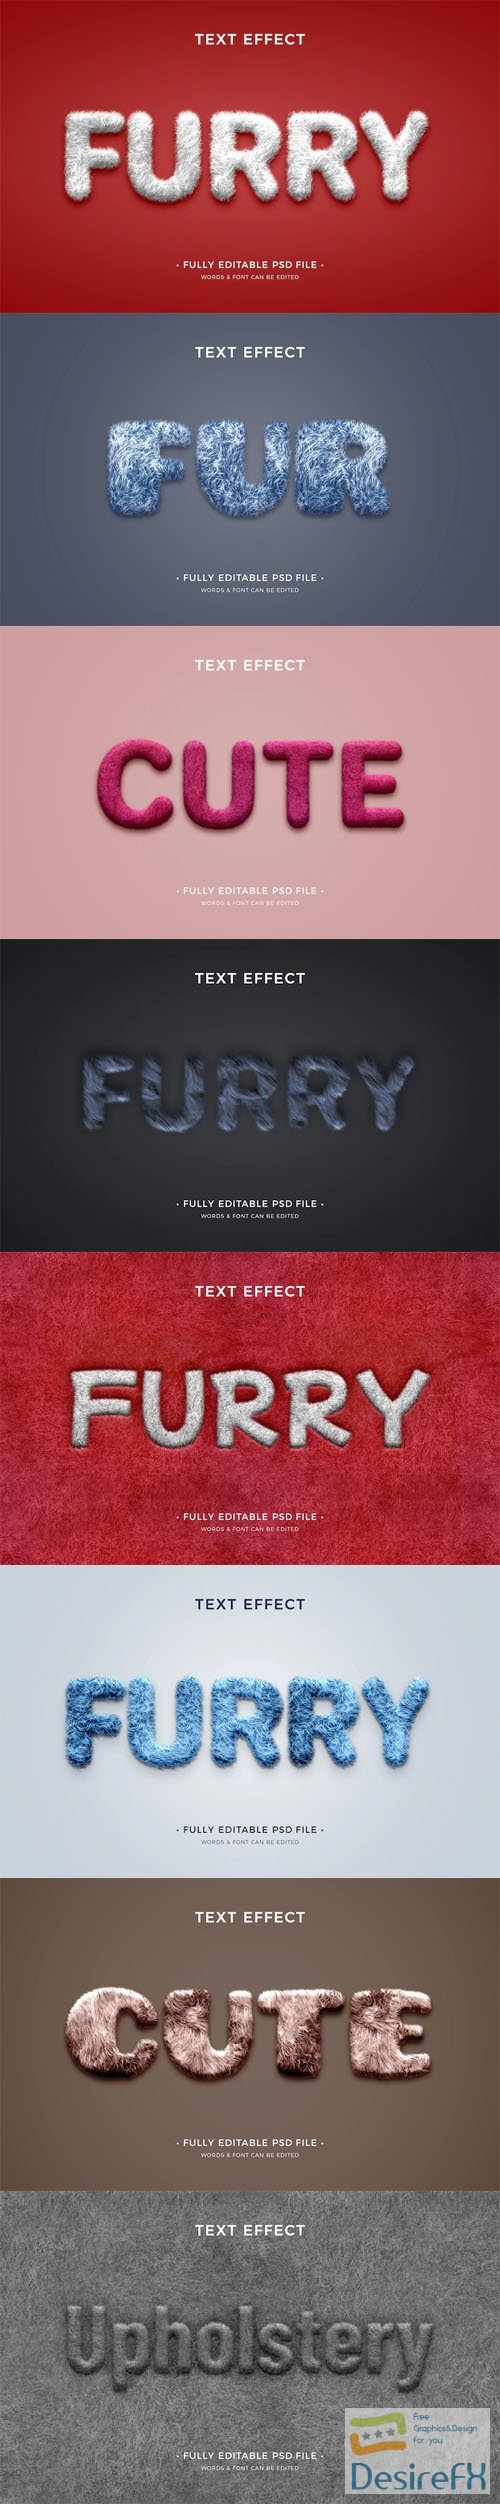 8 Cute Furry Text Effects for Photoshop